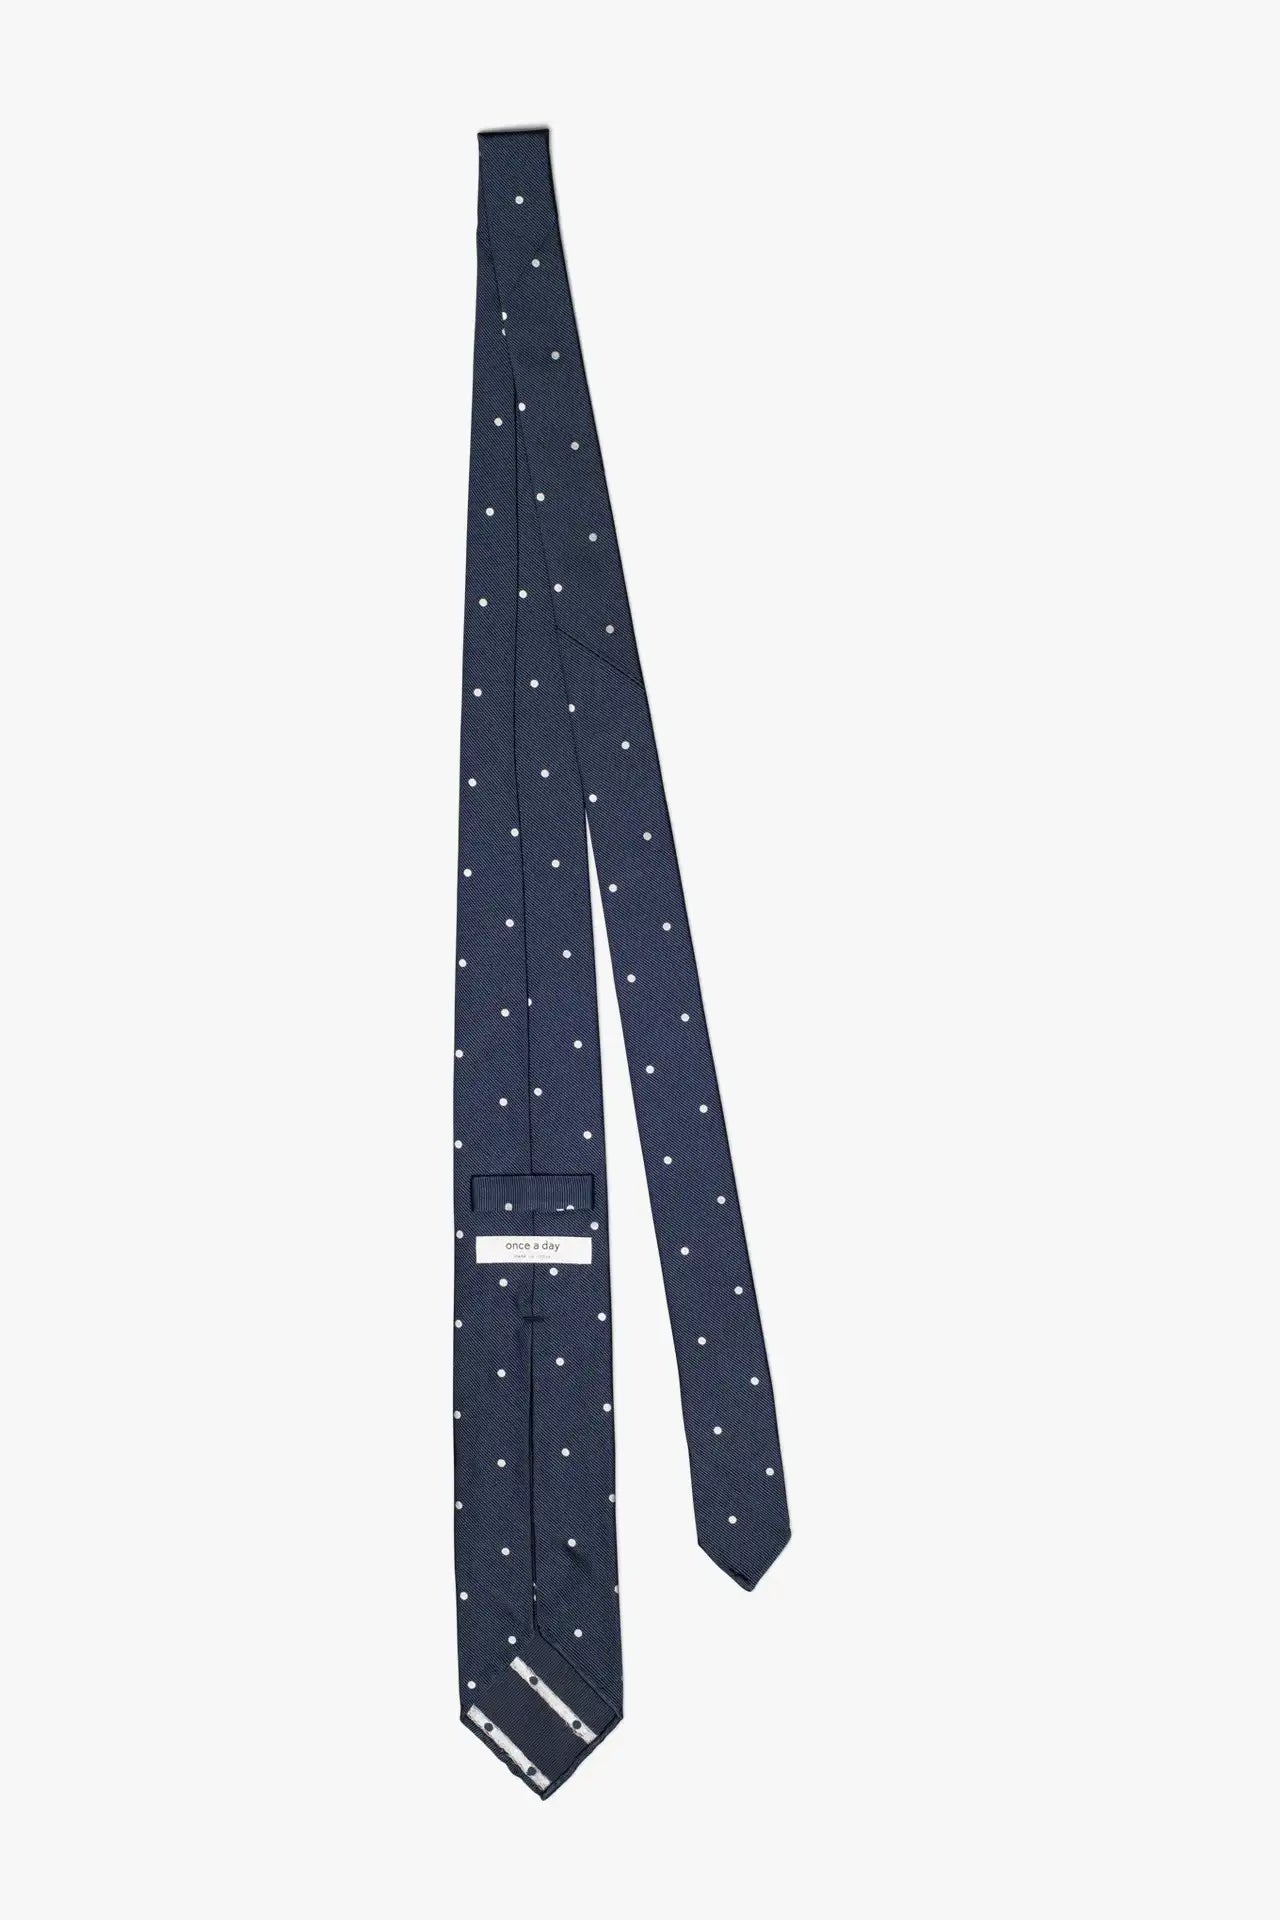 The Dotted 7 Fold - Navy Blue